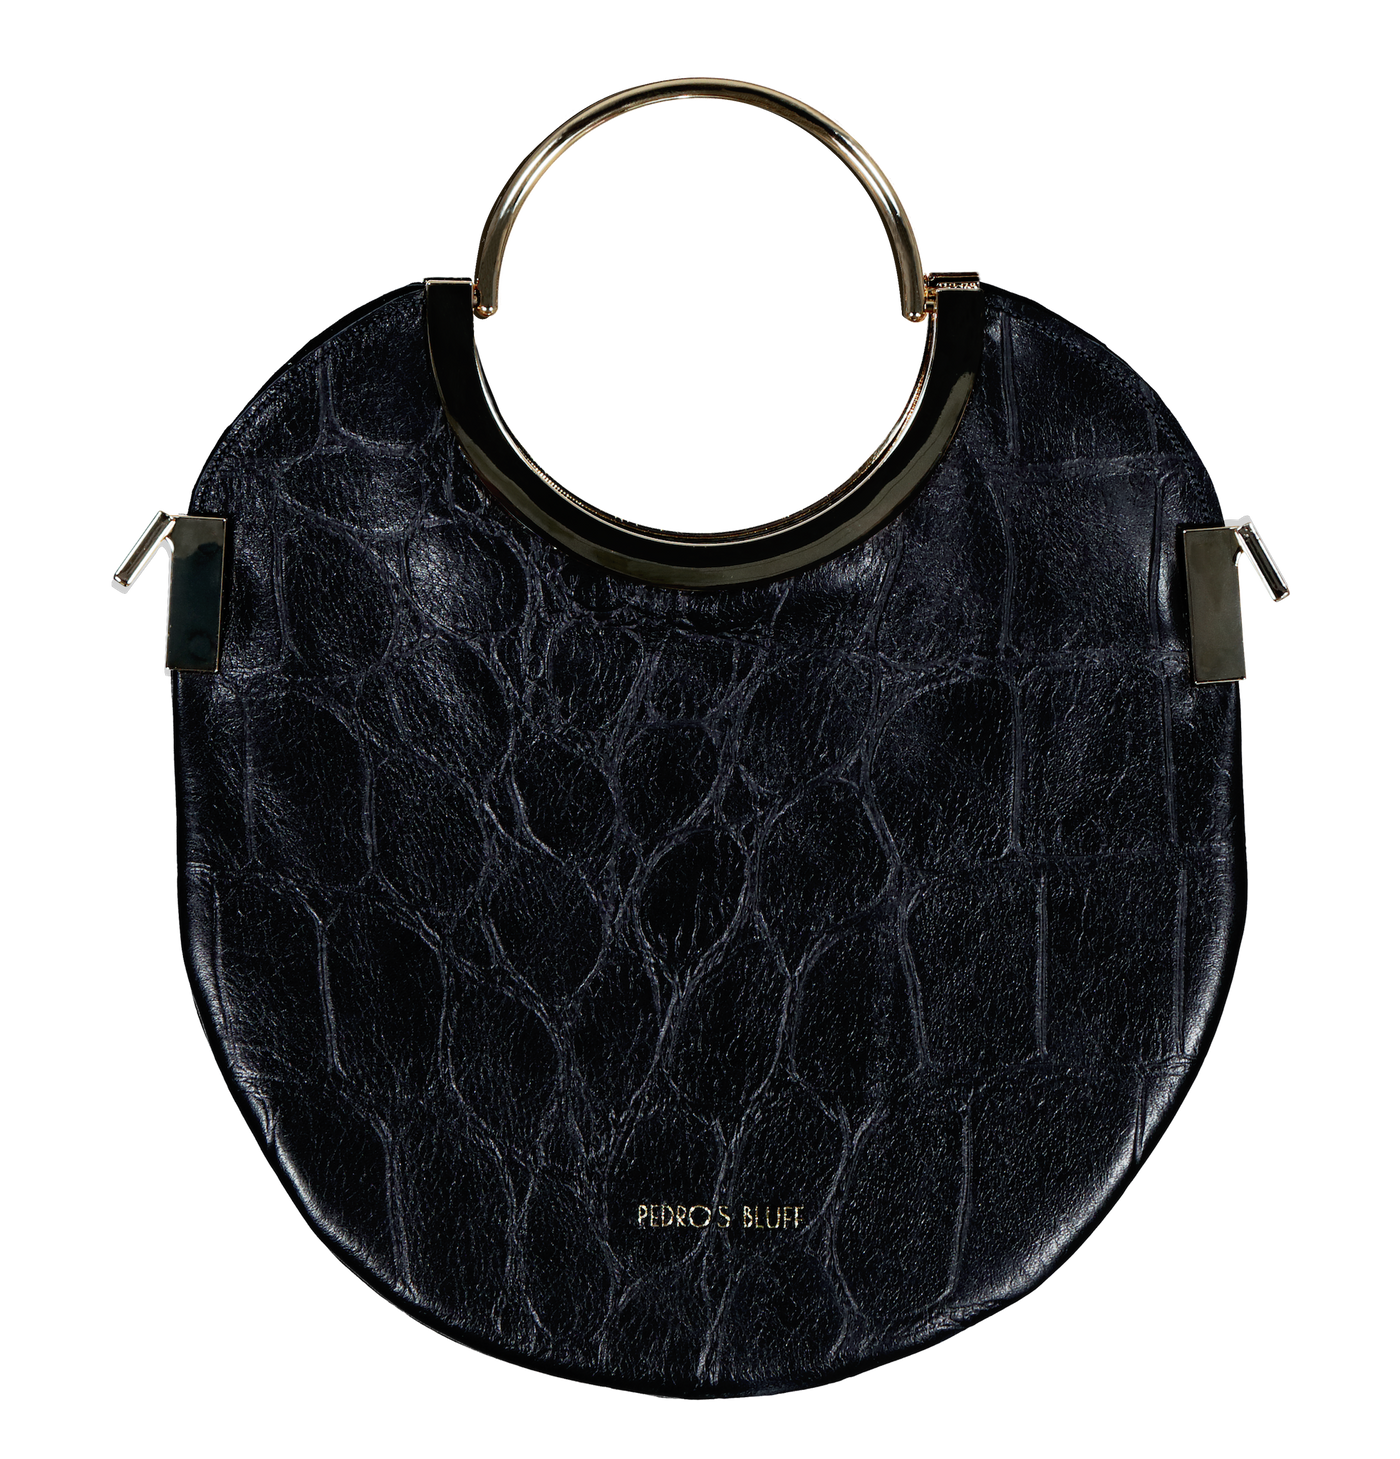 Vongole Circle Tote - Croc-Embossed Black - PEDRO'S BLUFF - New Zealand Leather Bags & Accessories